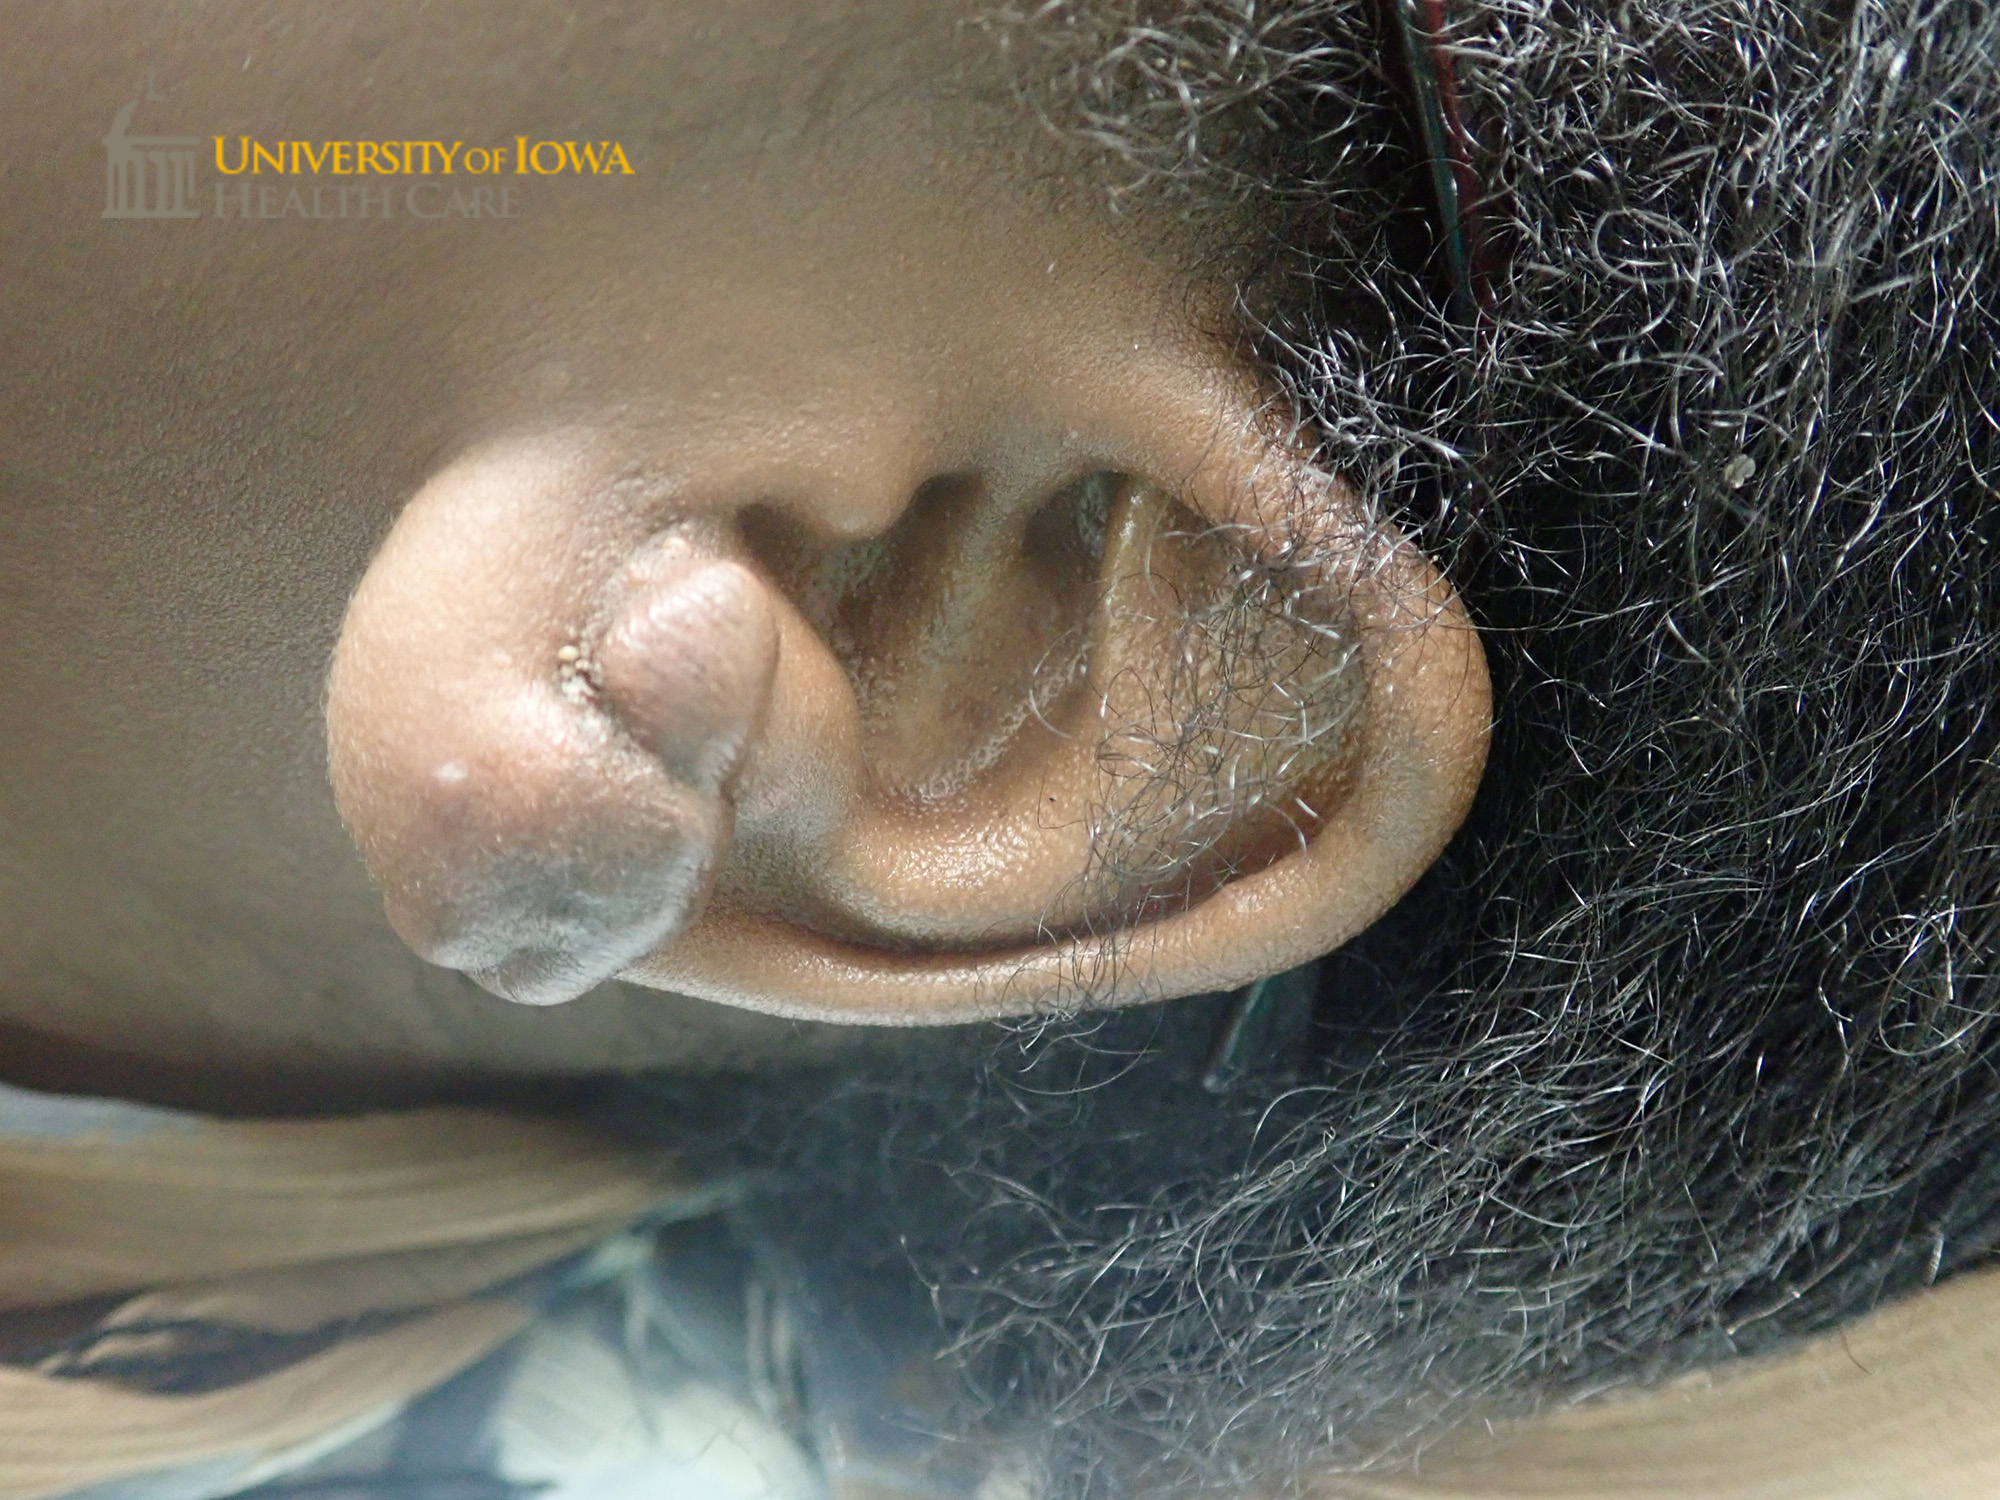 Keloidal nodules on either side of ear from piercing. (click images for higher resolution).